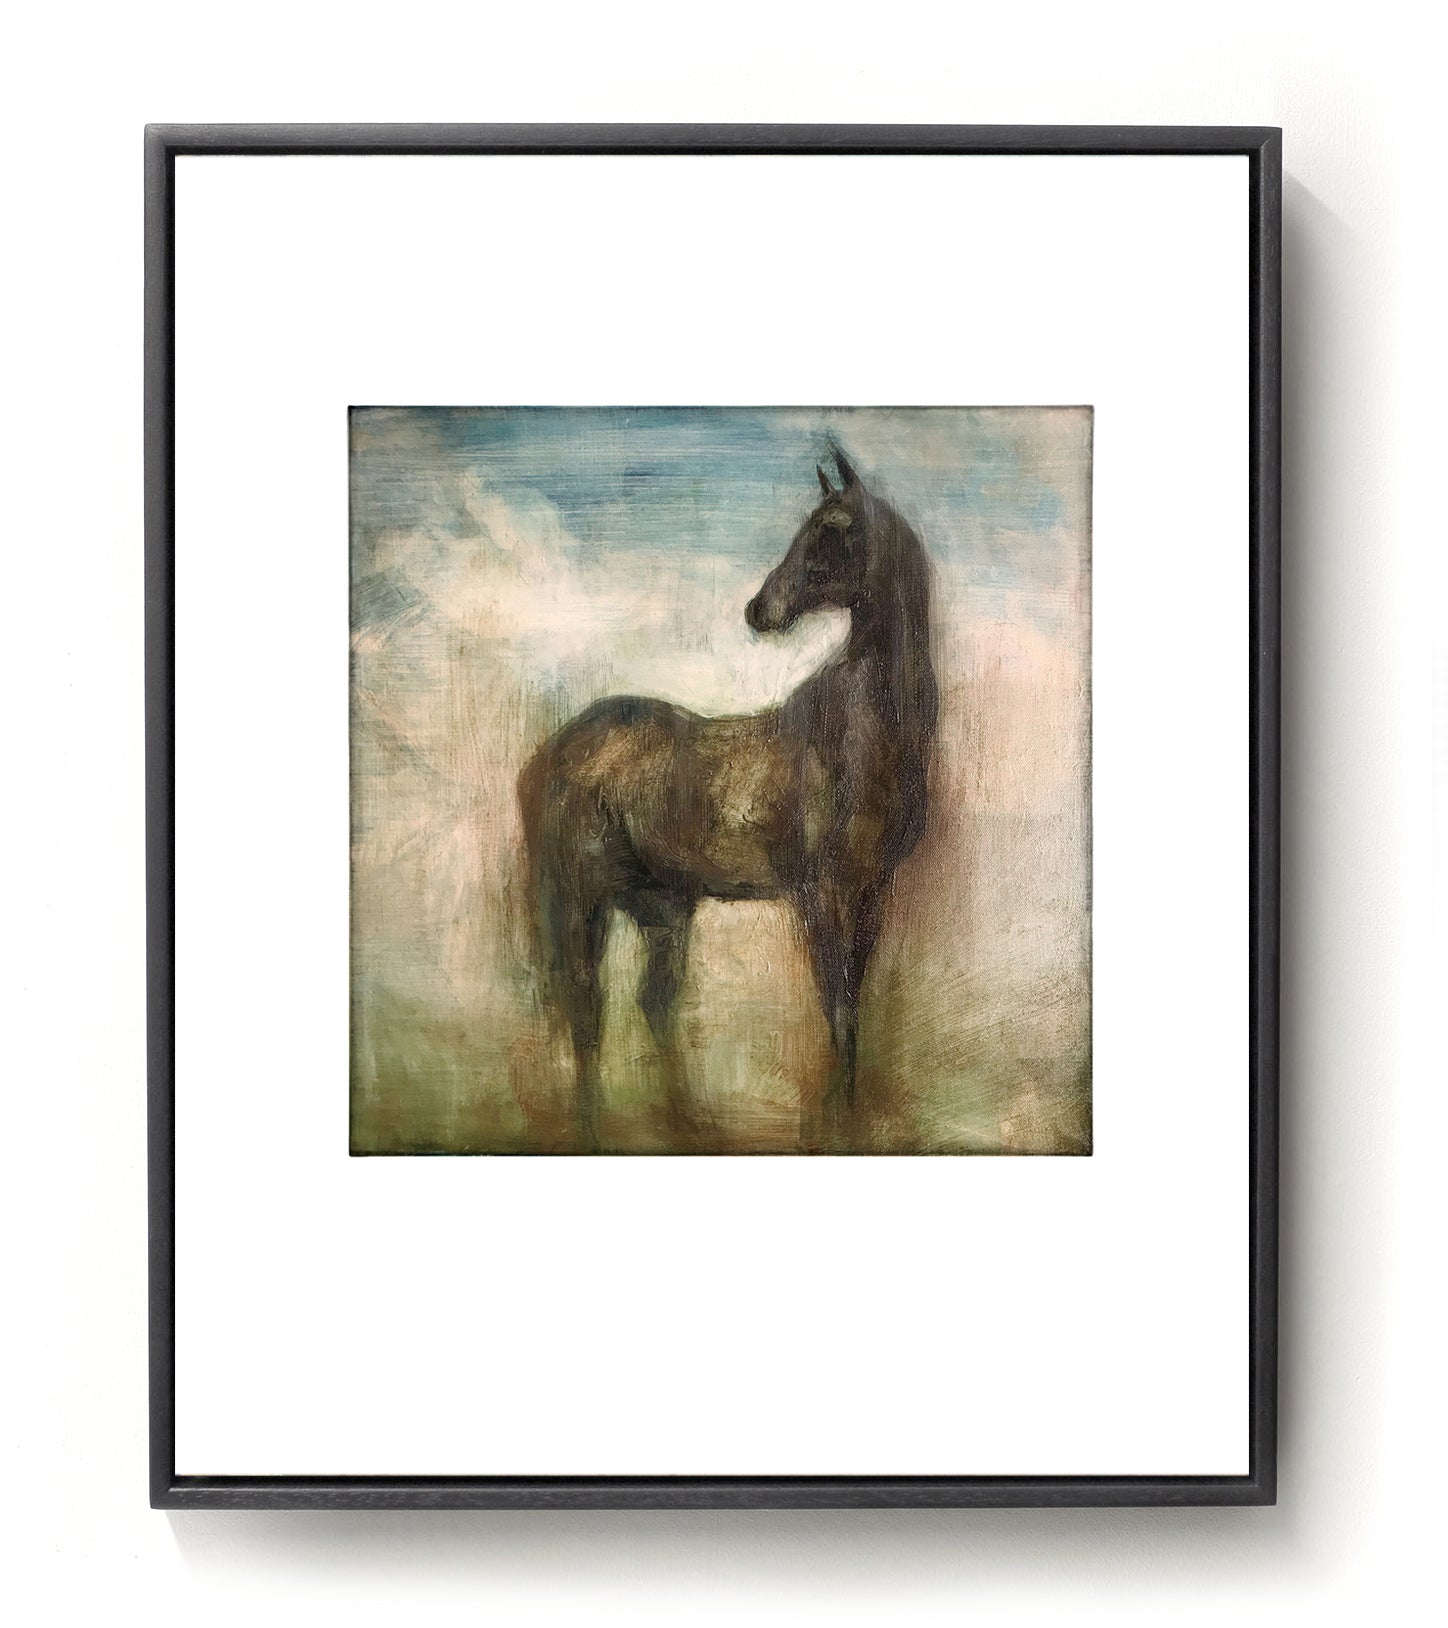 Hand finished giclee print of a horse in brown, yellow, green and blue tones.